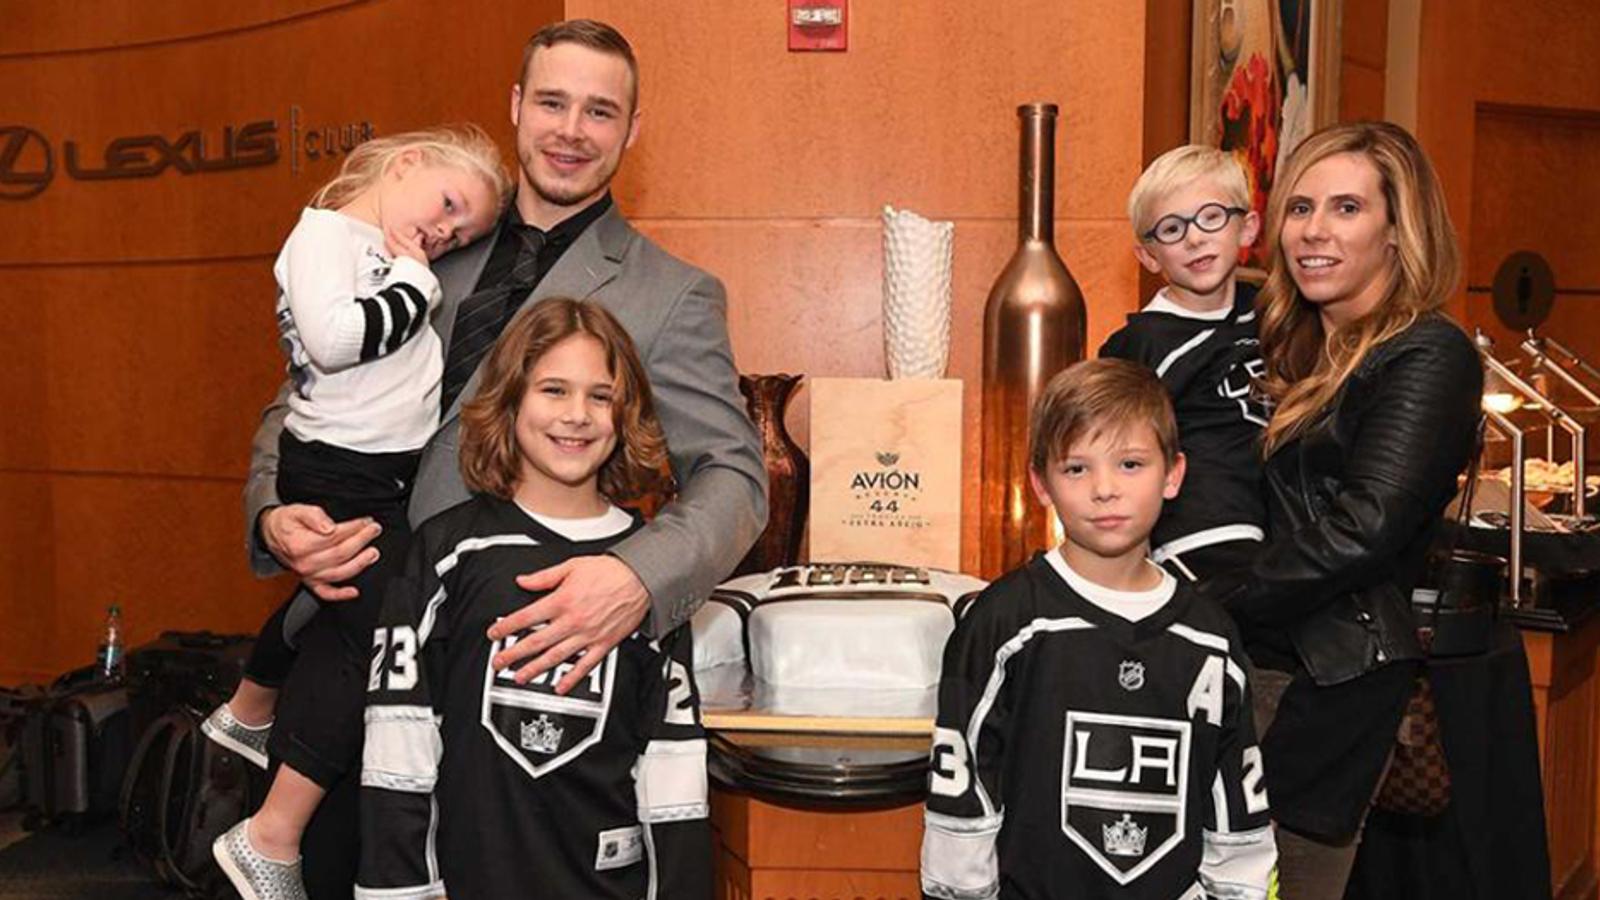 Dustin Brown's wife Nicole named Executive Director within Kings organization